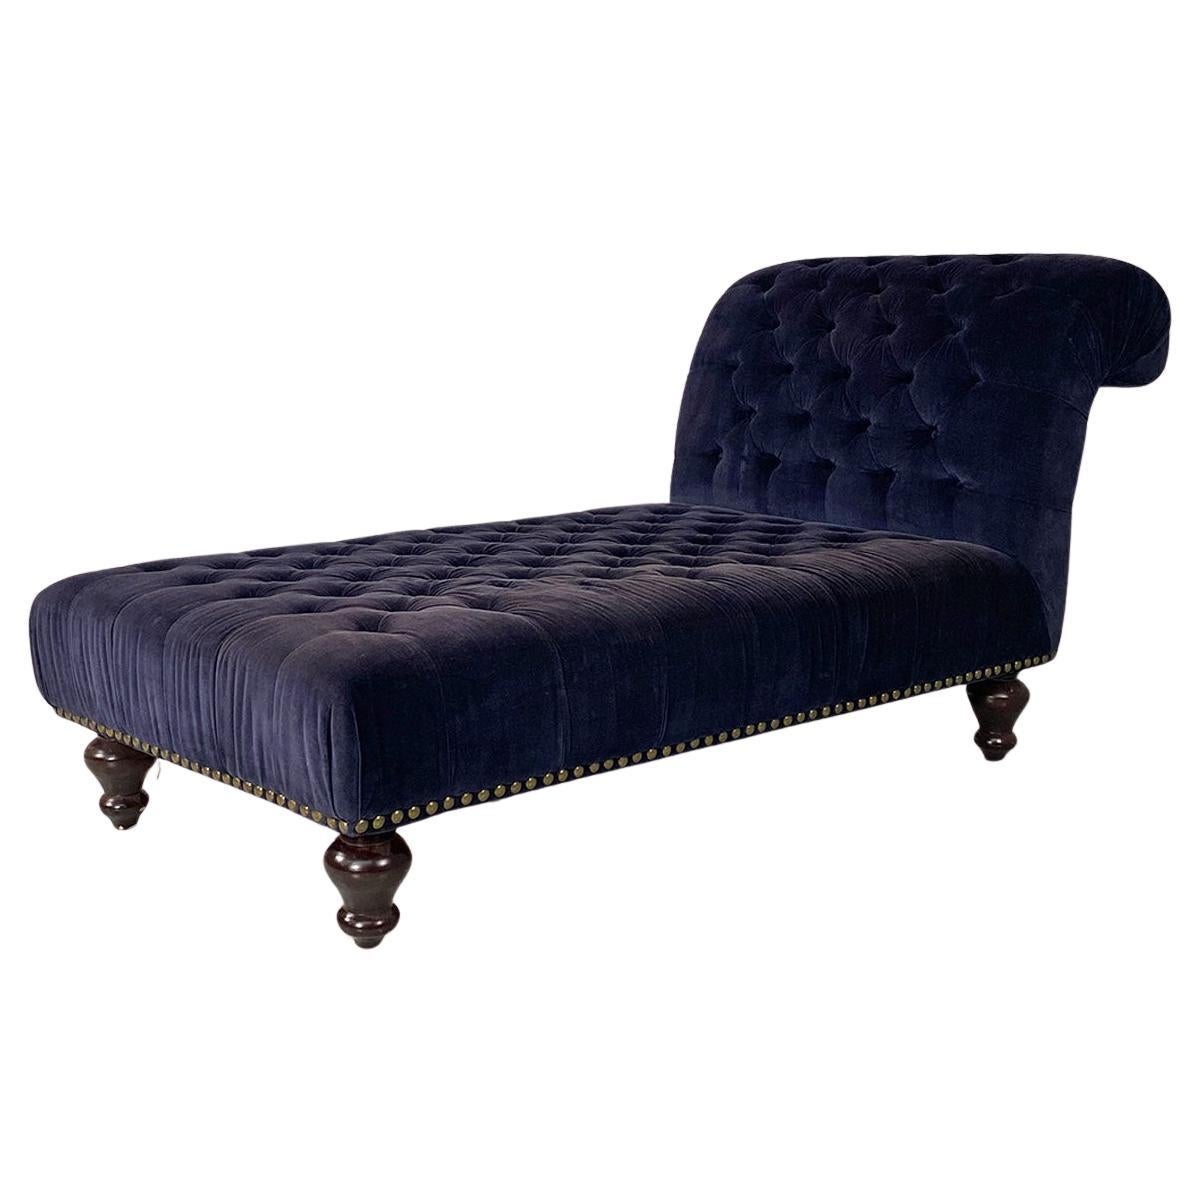 Italian antique style blue velvet and wood dormeuse or chaise longue, 1980s